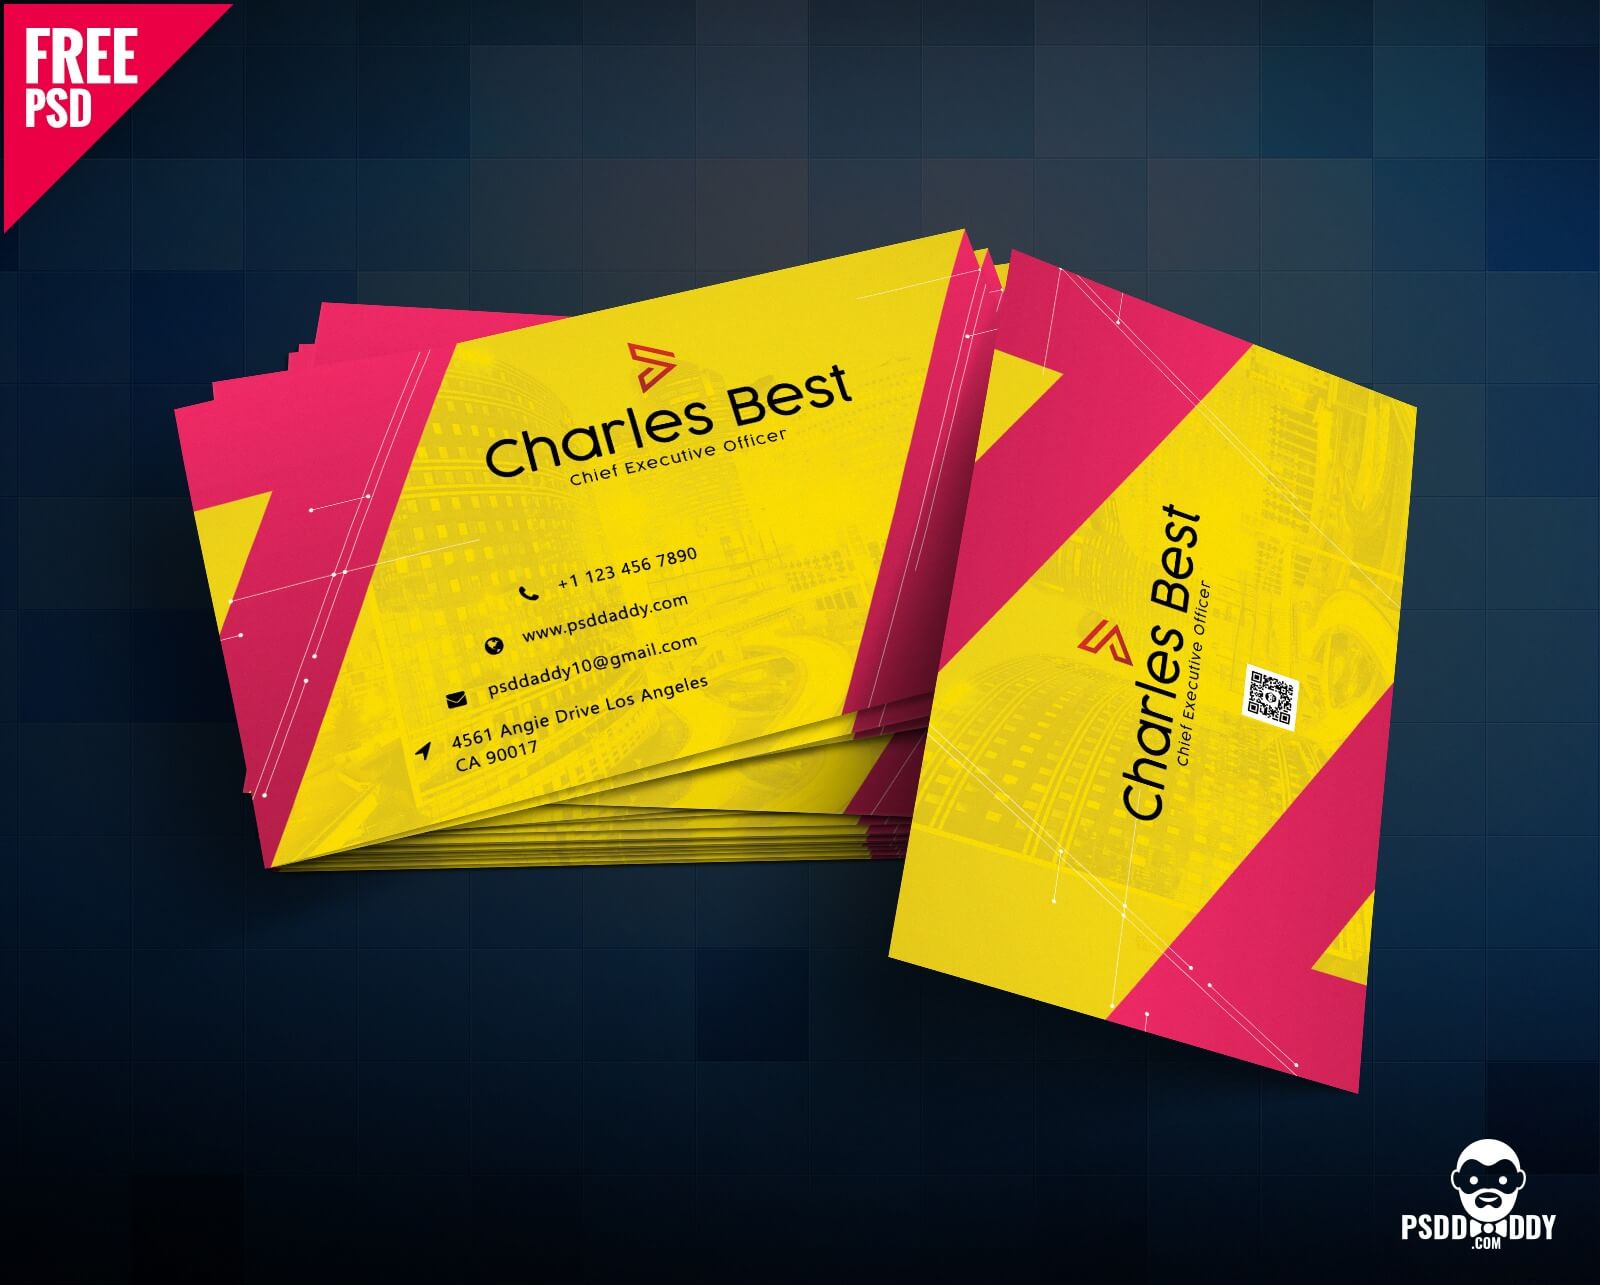 Download] Creative Business Card Free Psd | Psddaddy Throughout Business Card Size Psd Template